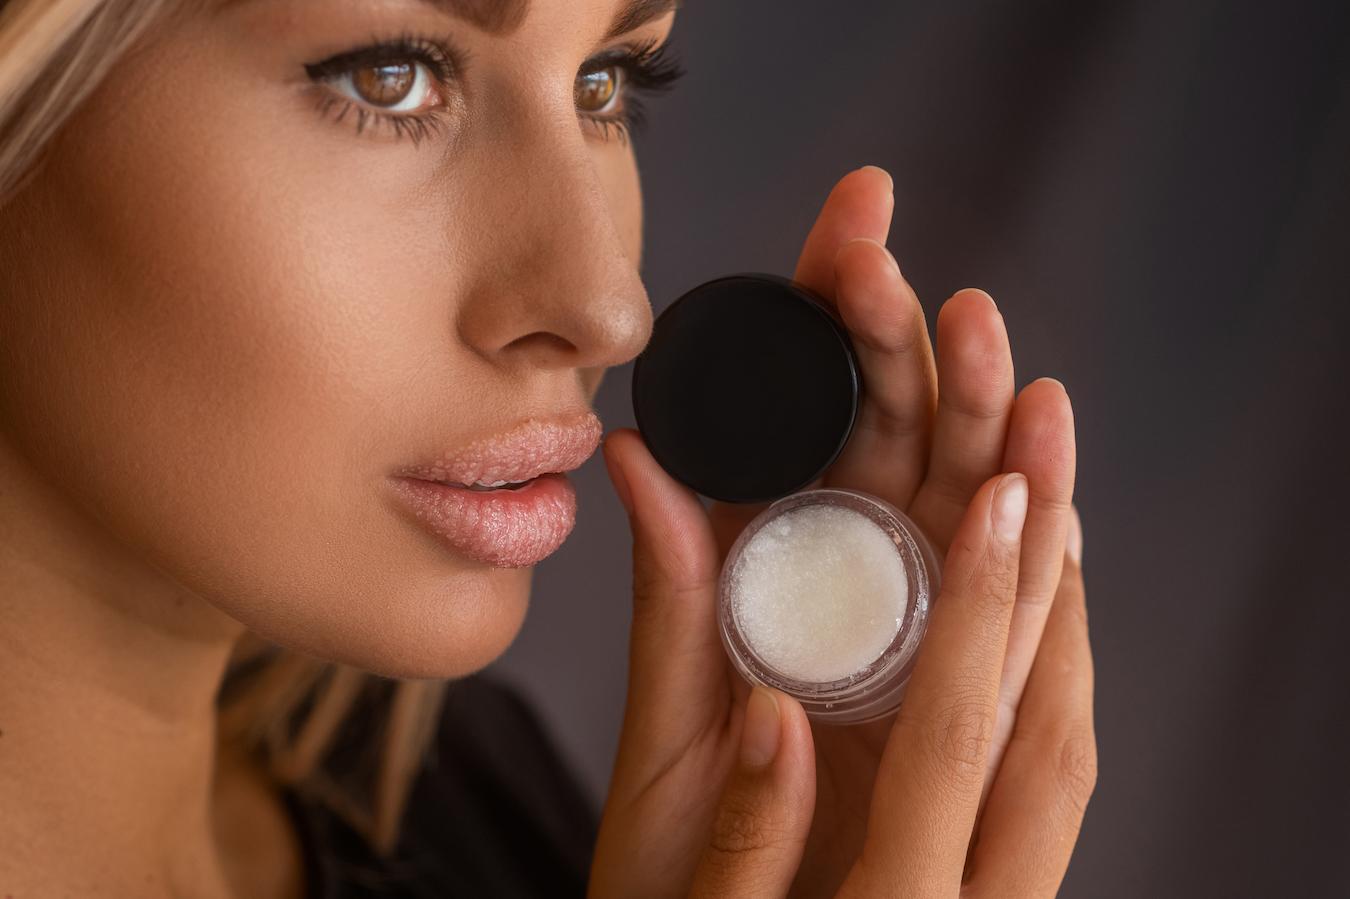 Use lip scrubs for healthy looking lips and to keep lips smooth